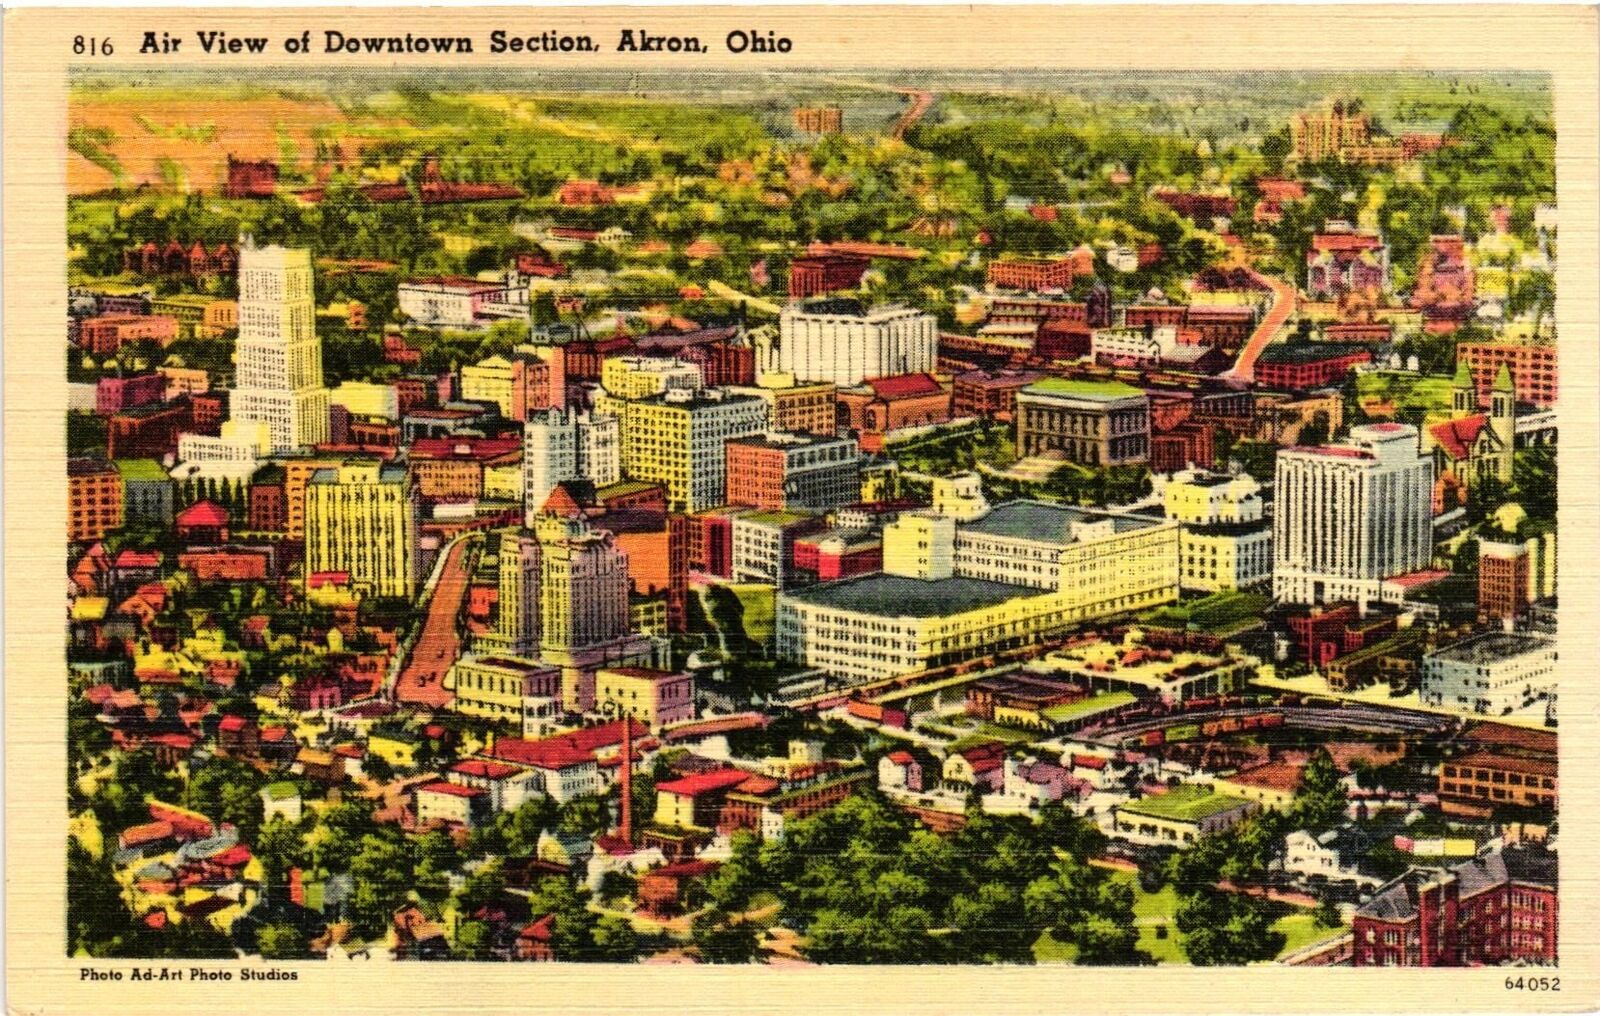 Vintage Postcard- DOWNTOWN, AKRON, OH. Early 1900s